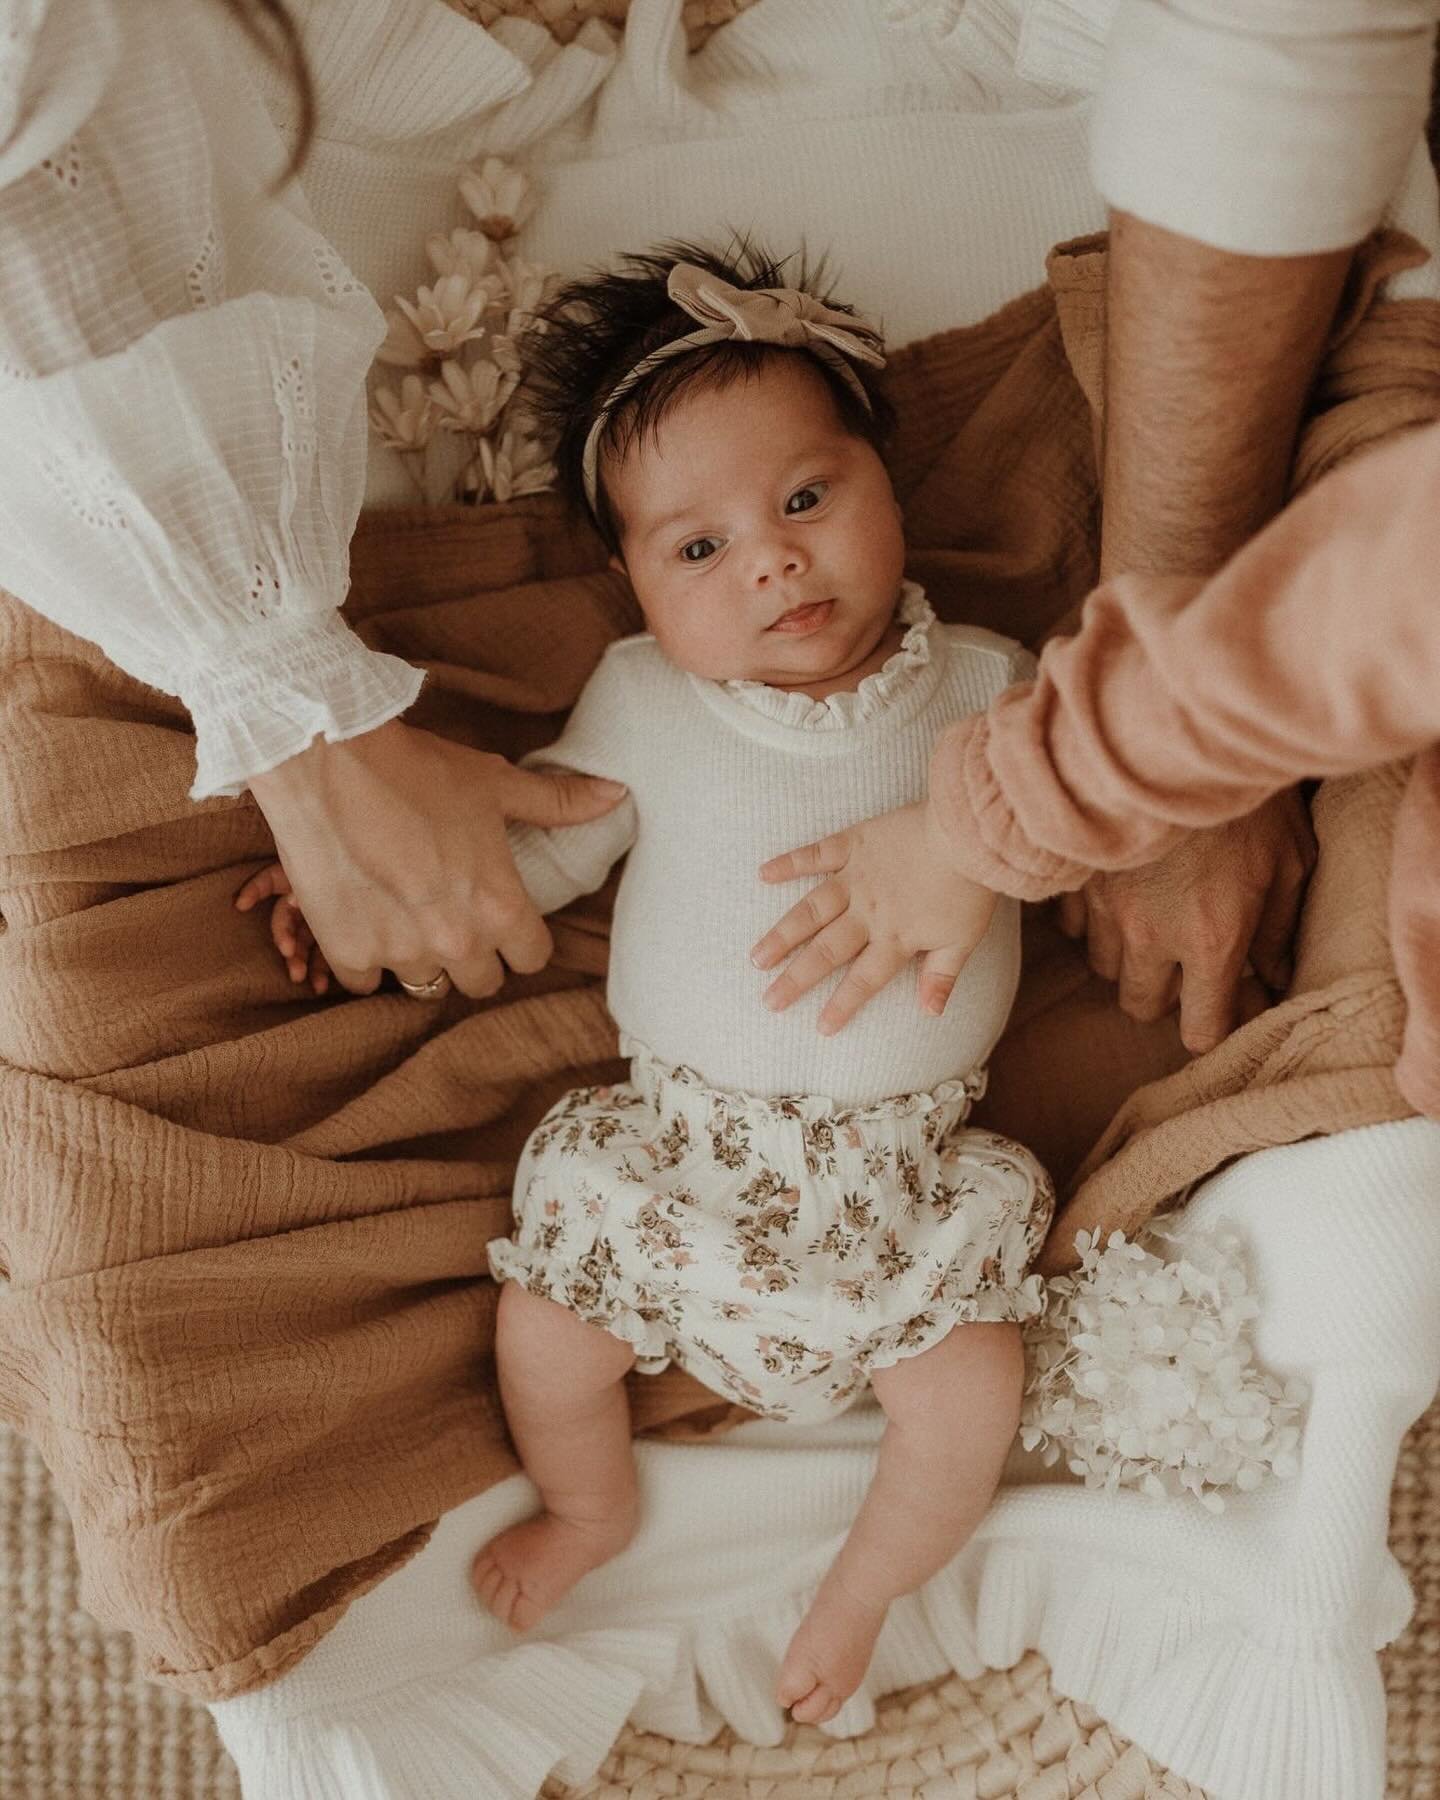 Trying to cram all the love from this session into 10 sides was a challenge. Obsessed with all of these beautiful family moments as Tash, Trev and Honey welcome baby Autumn into their fam 🌼